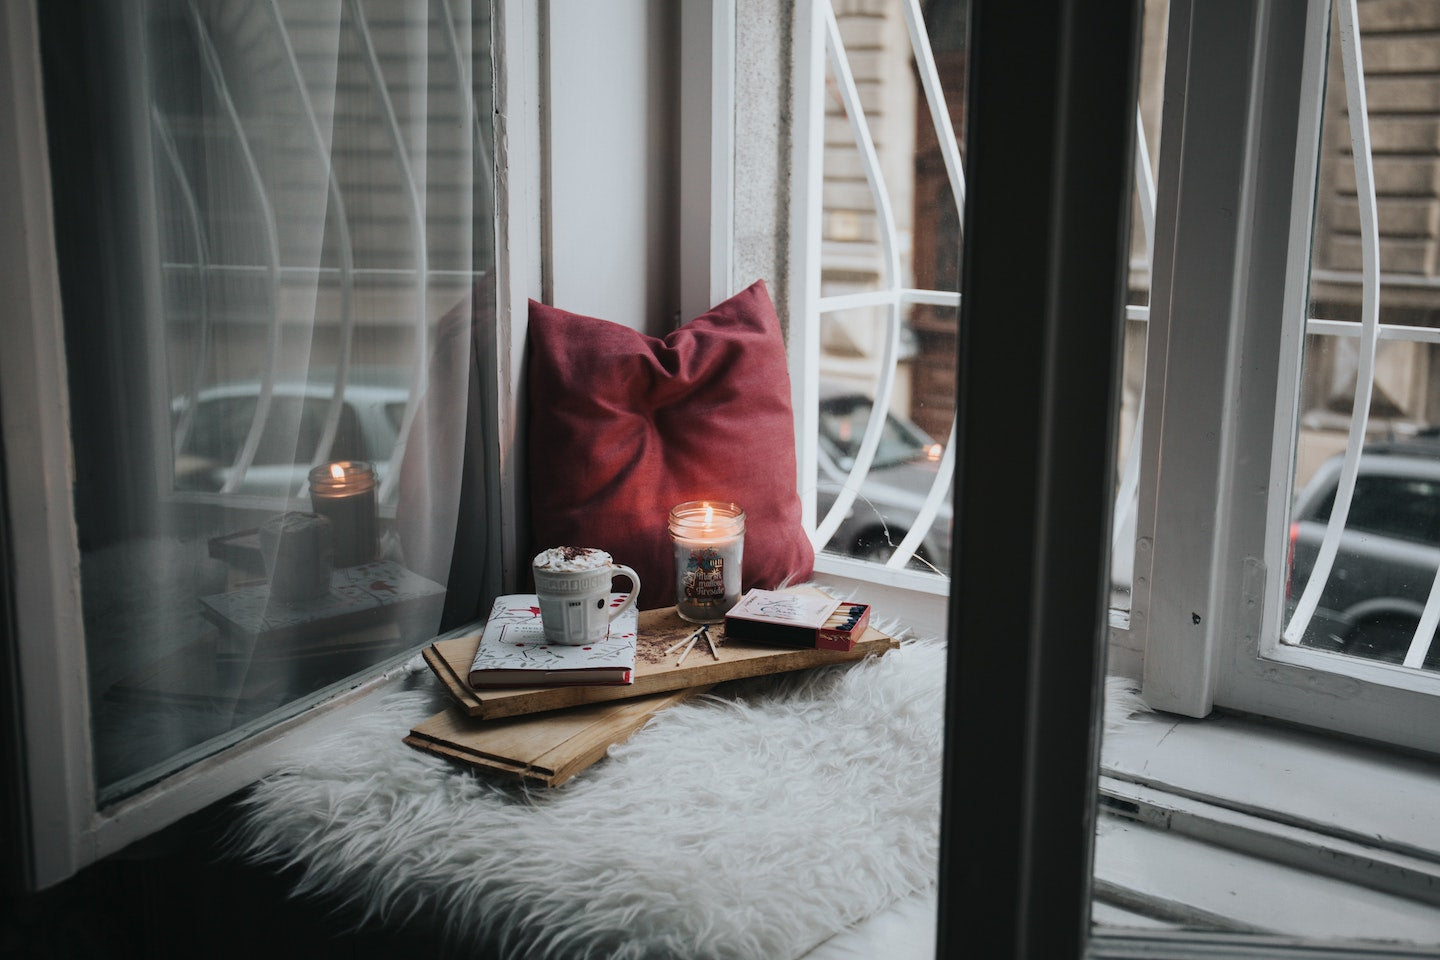 A reading nook by a window set up with a red pillow, a warm drink, a candle and some books.